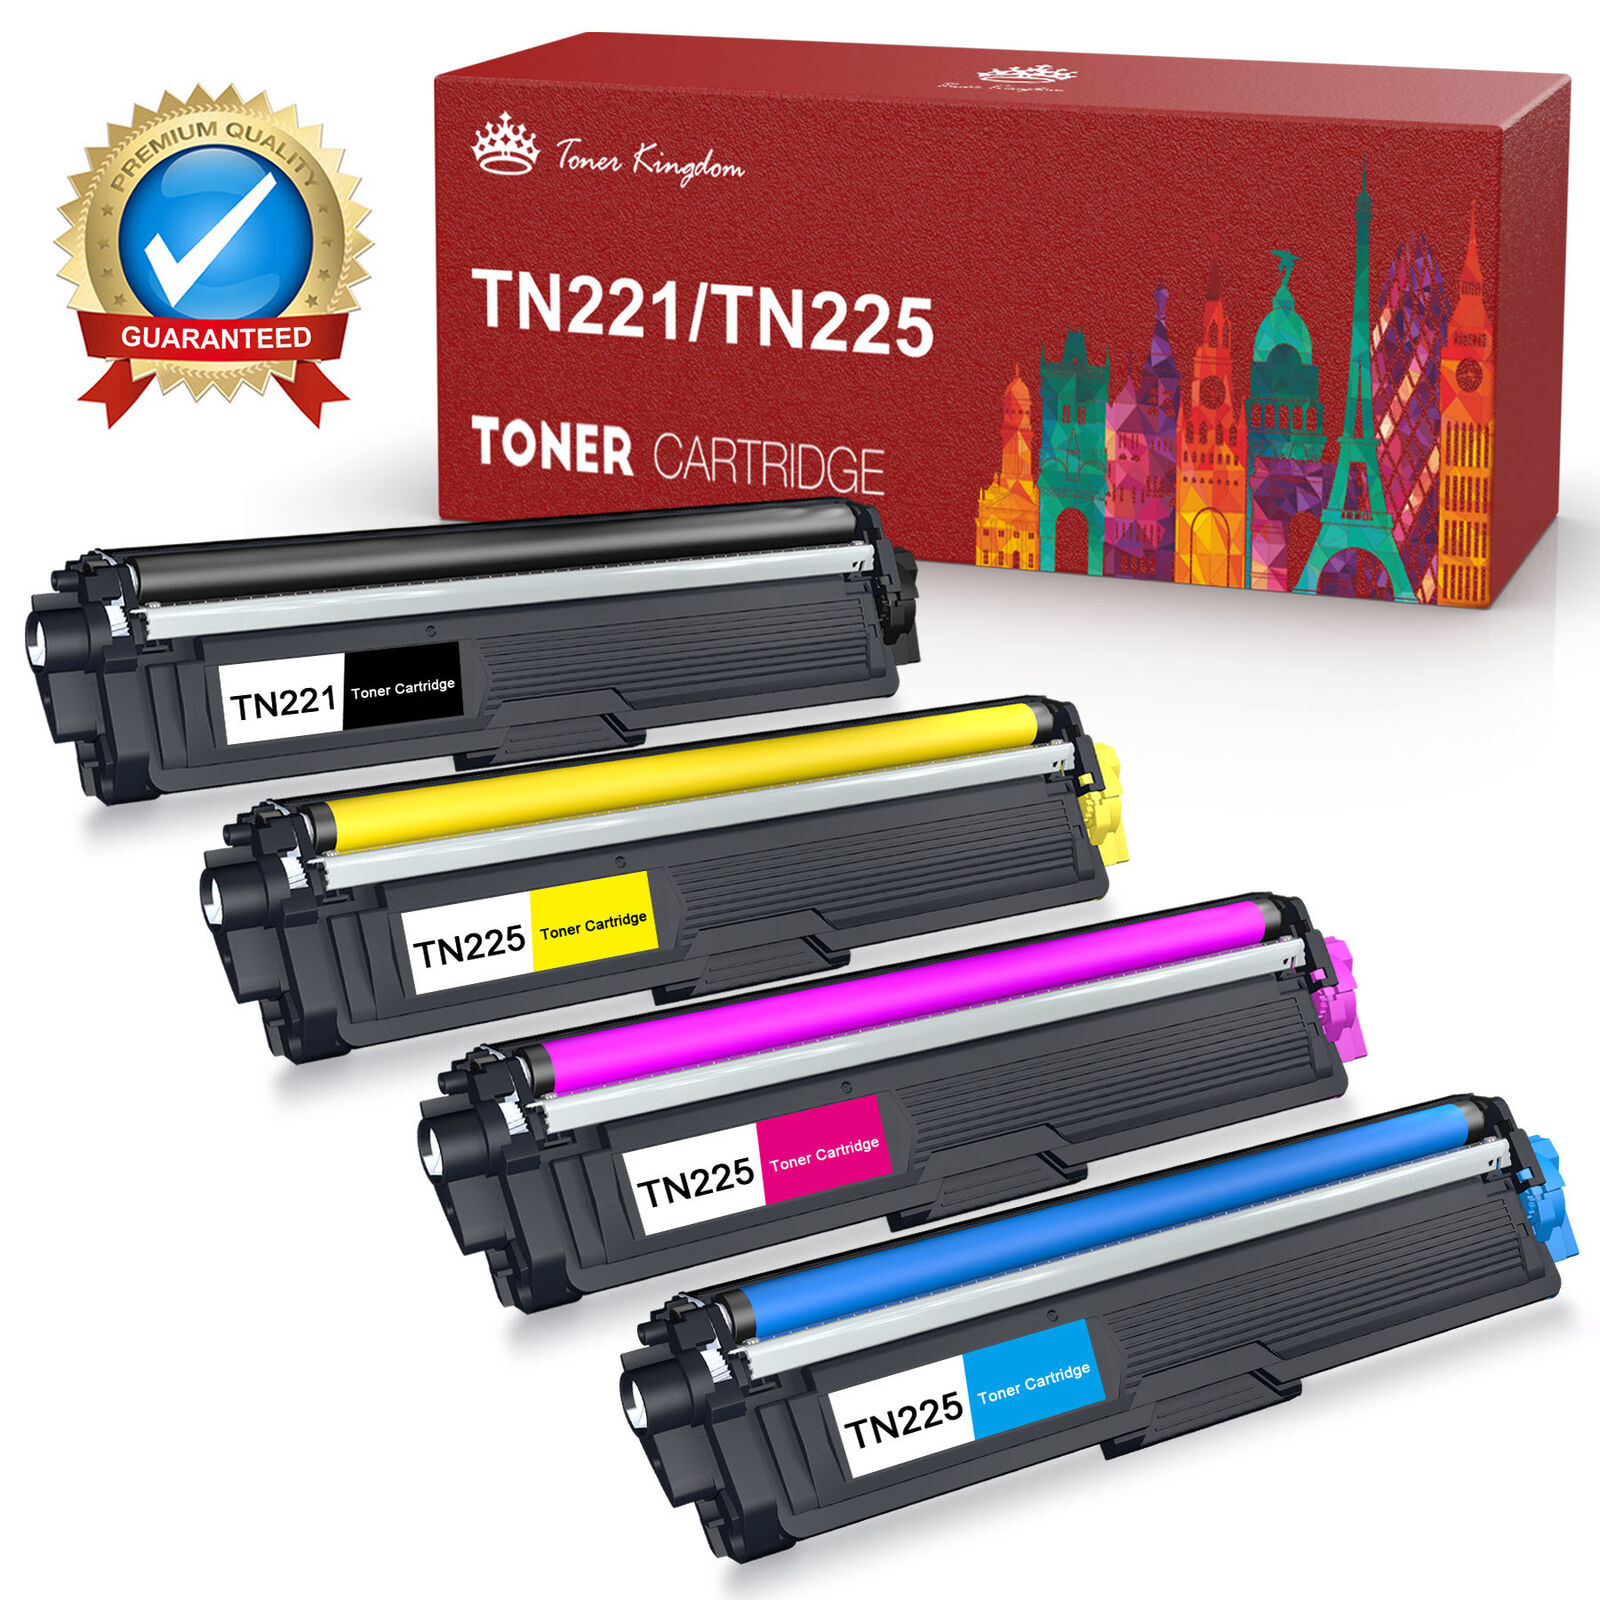 4 PK For Brother TN221 BK TN225 Color Toner MFC-9130CW, MFC-9330CDW, MFC-9340CDW